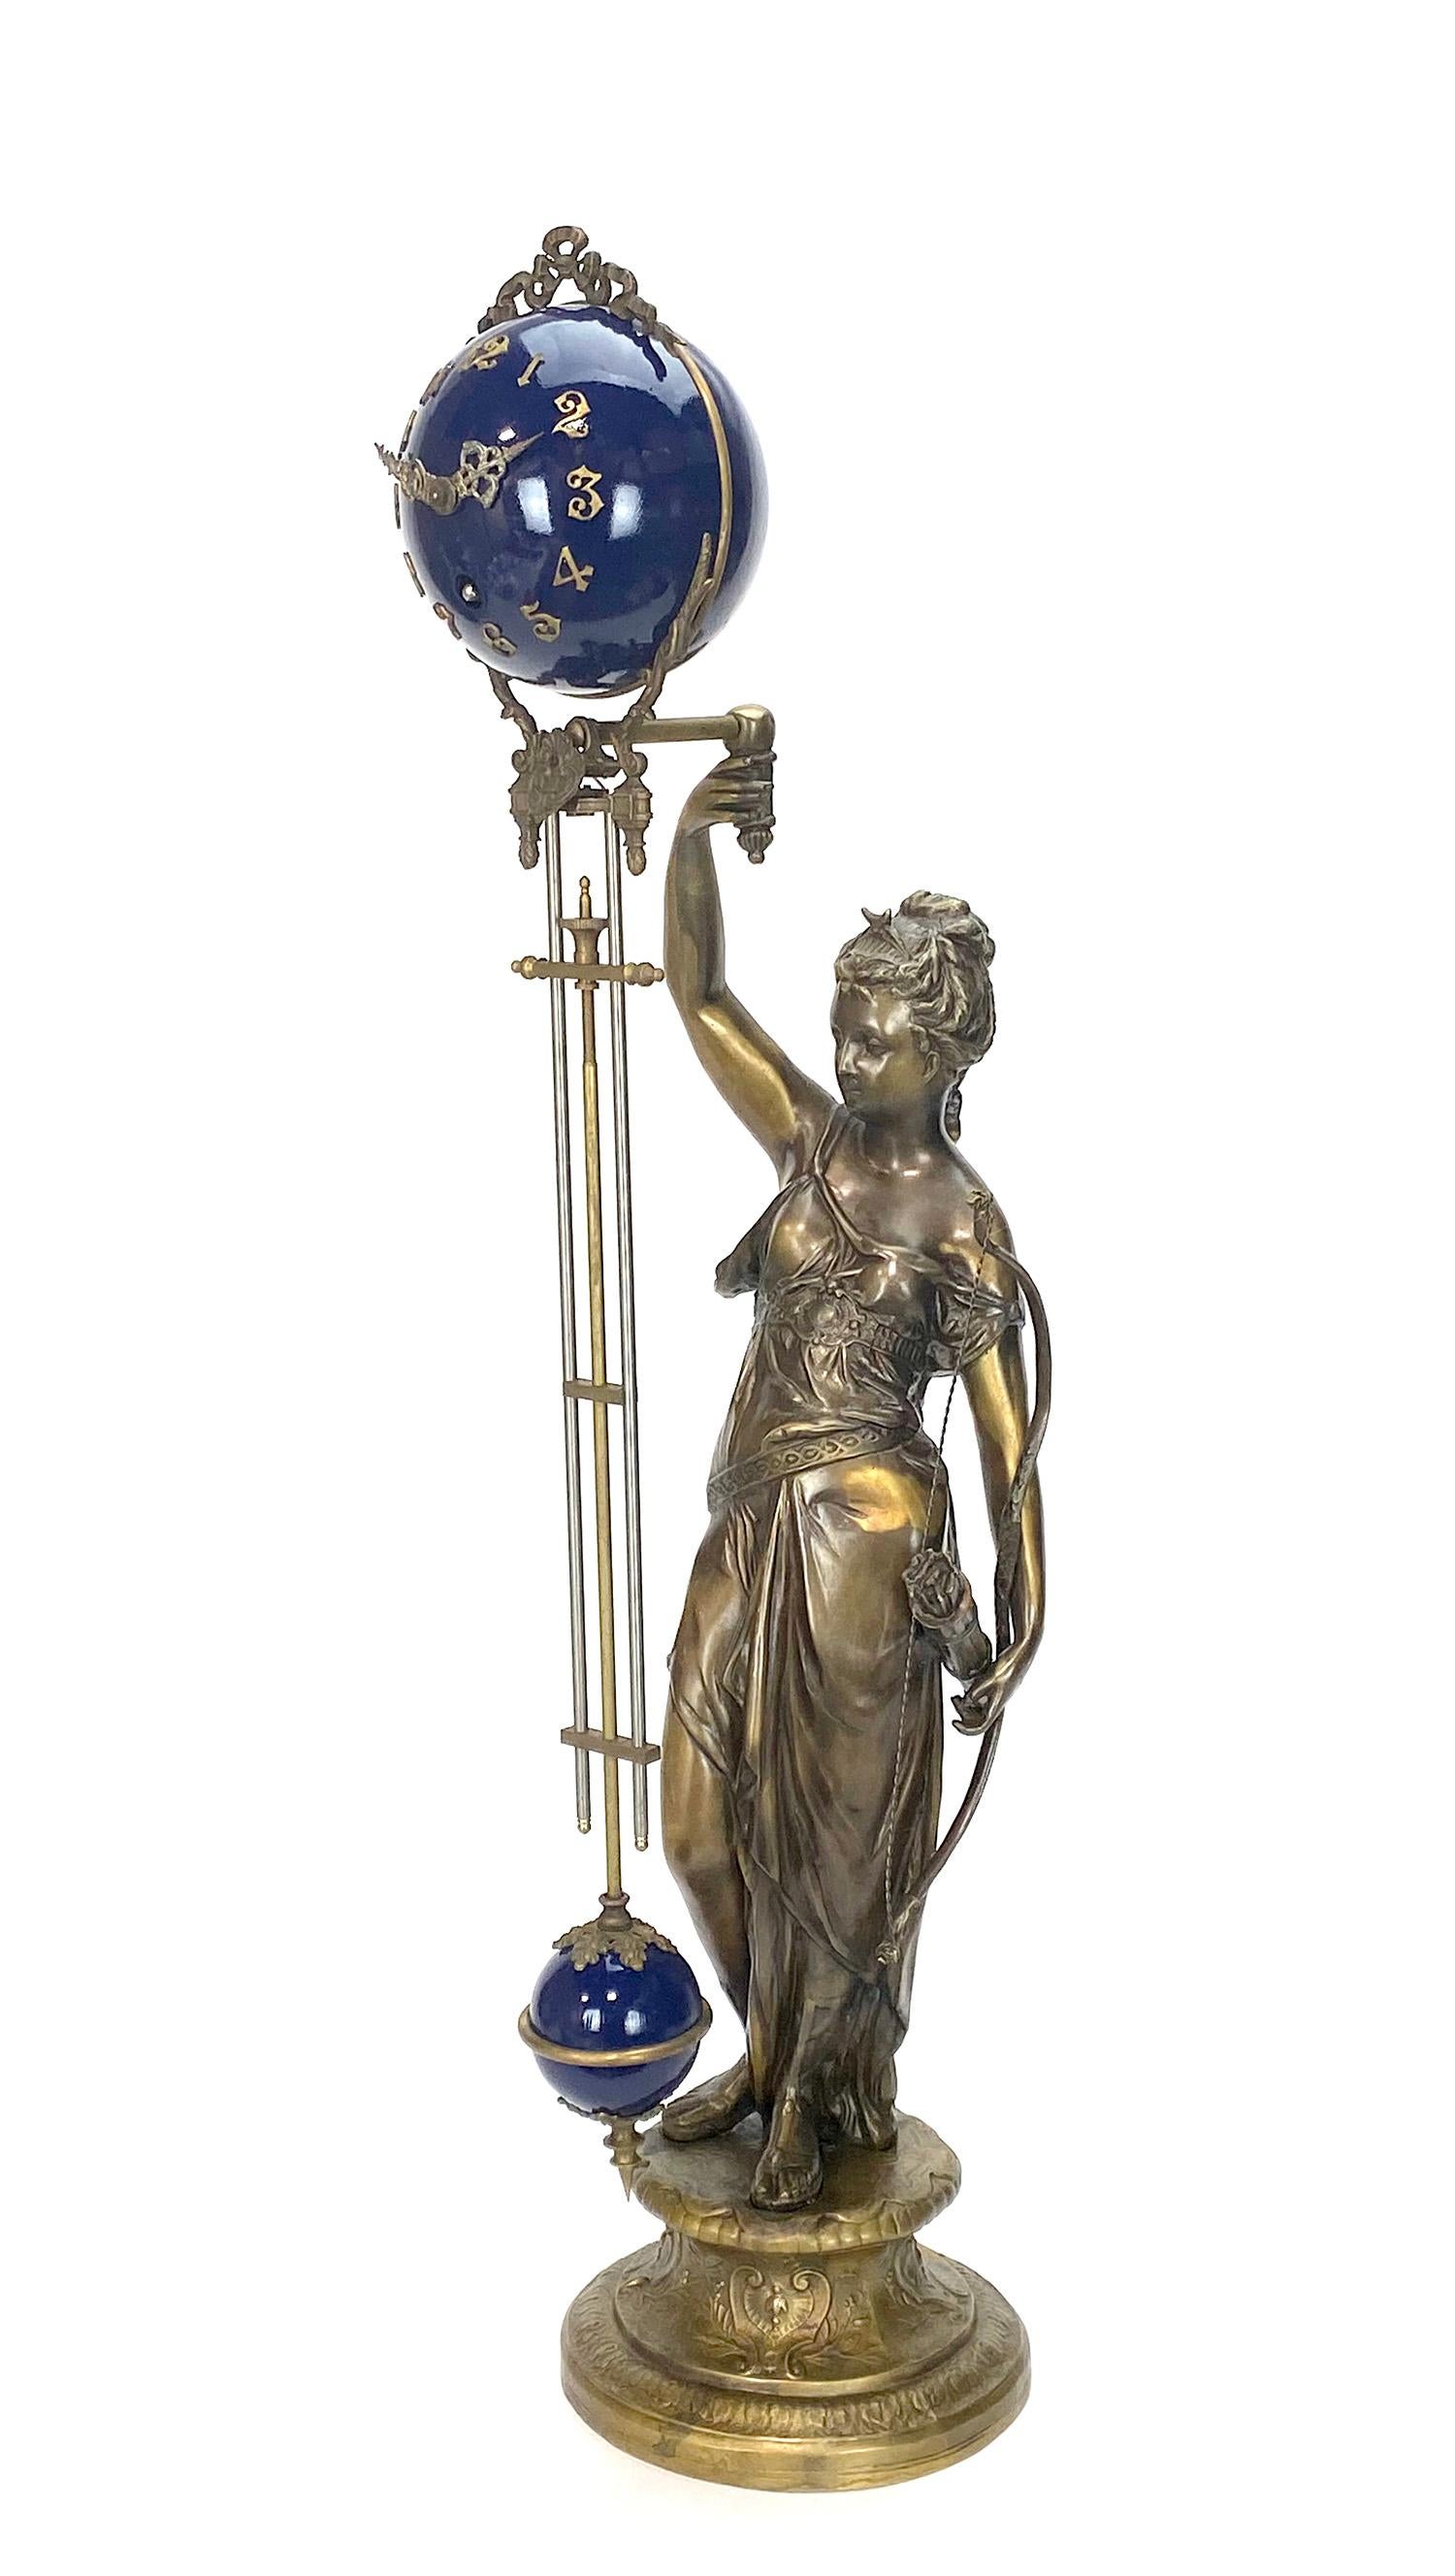 Large Mystery Diana cobalt blue ball swinging clock

Excellent Diana statue 4